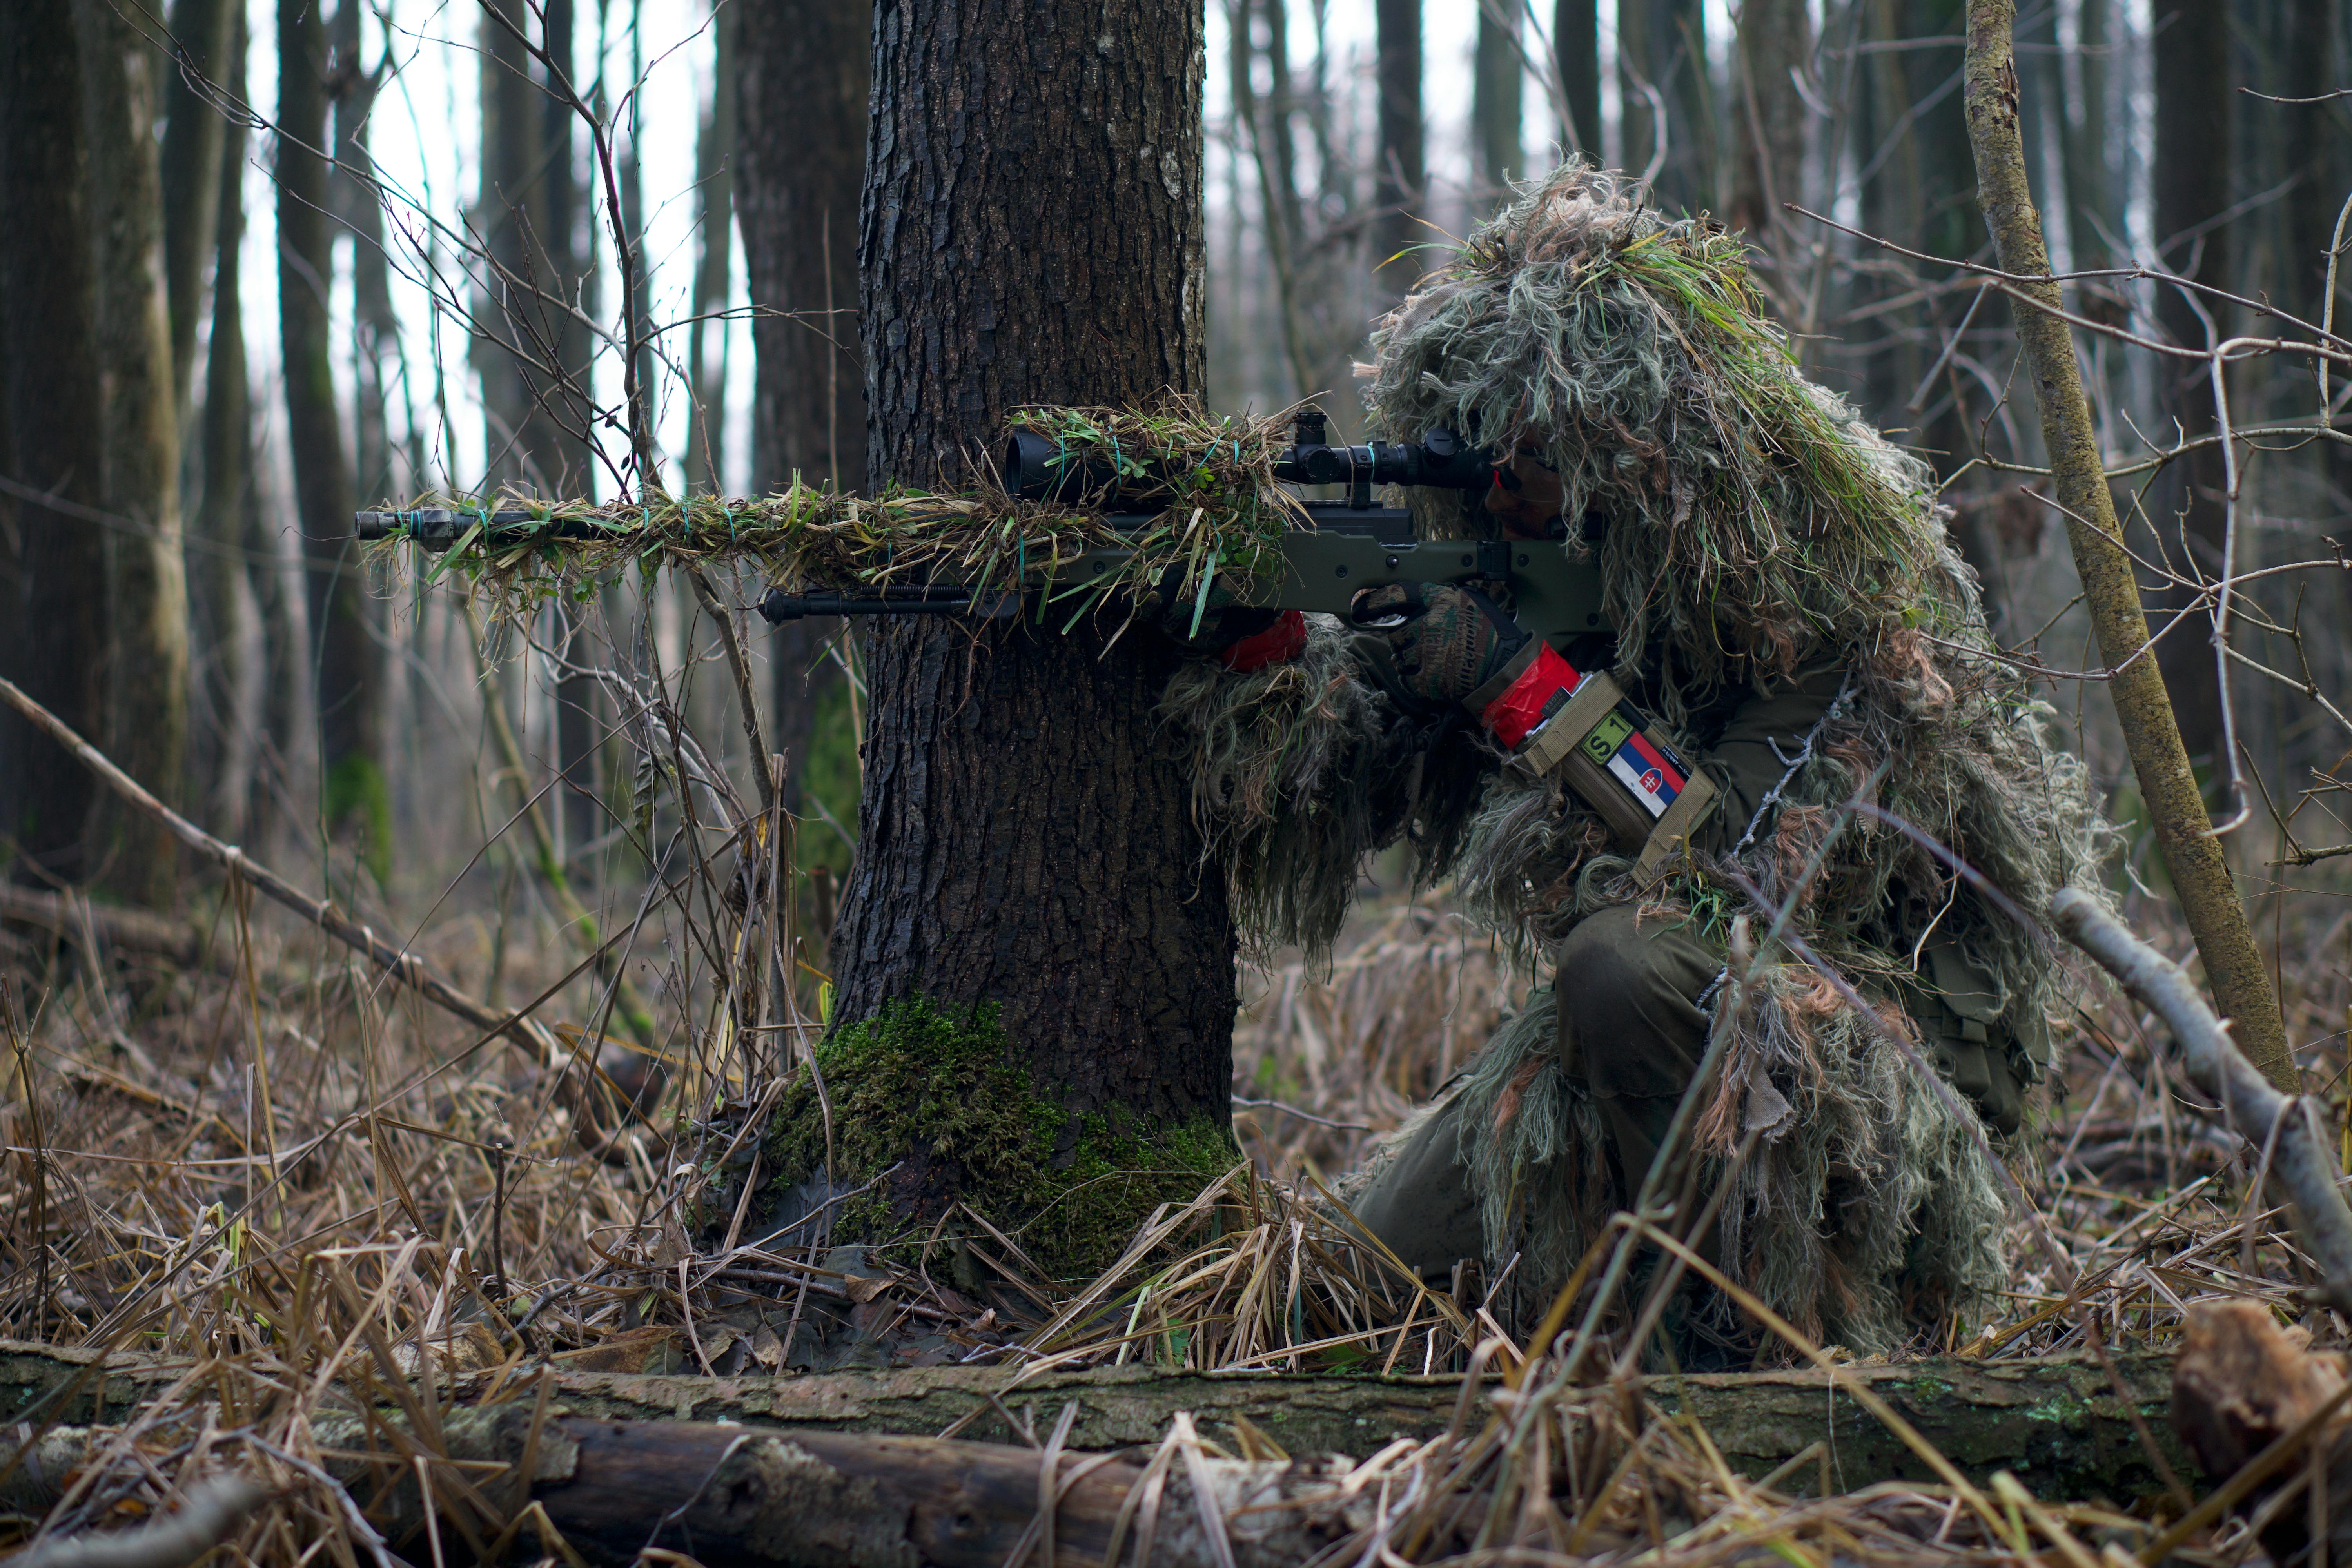 Camouflaged Sniper in the Forest Stock Image - Image of enemy